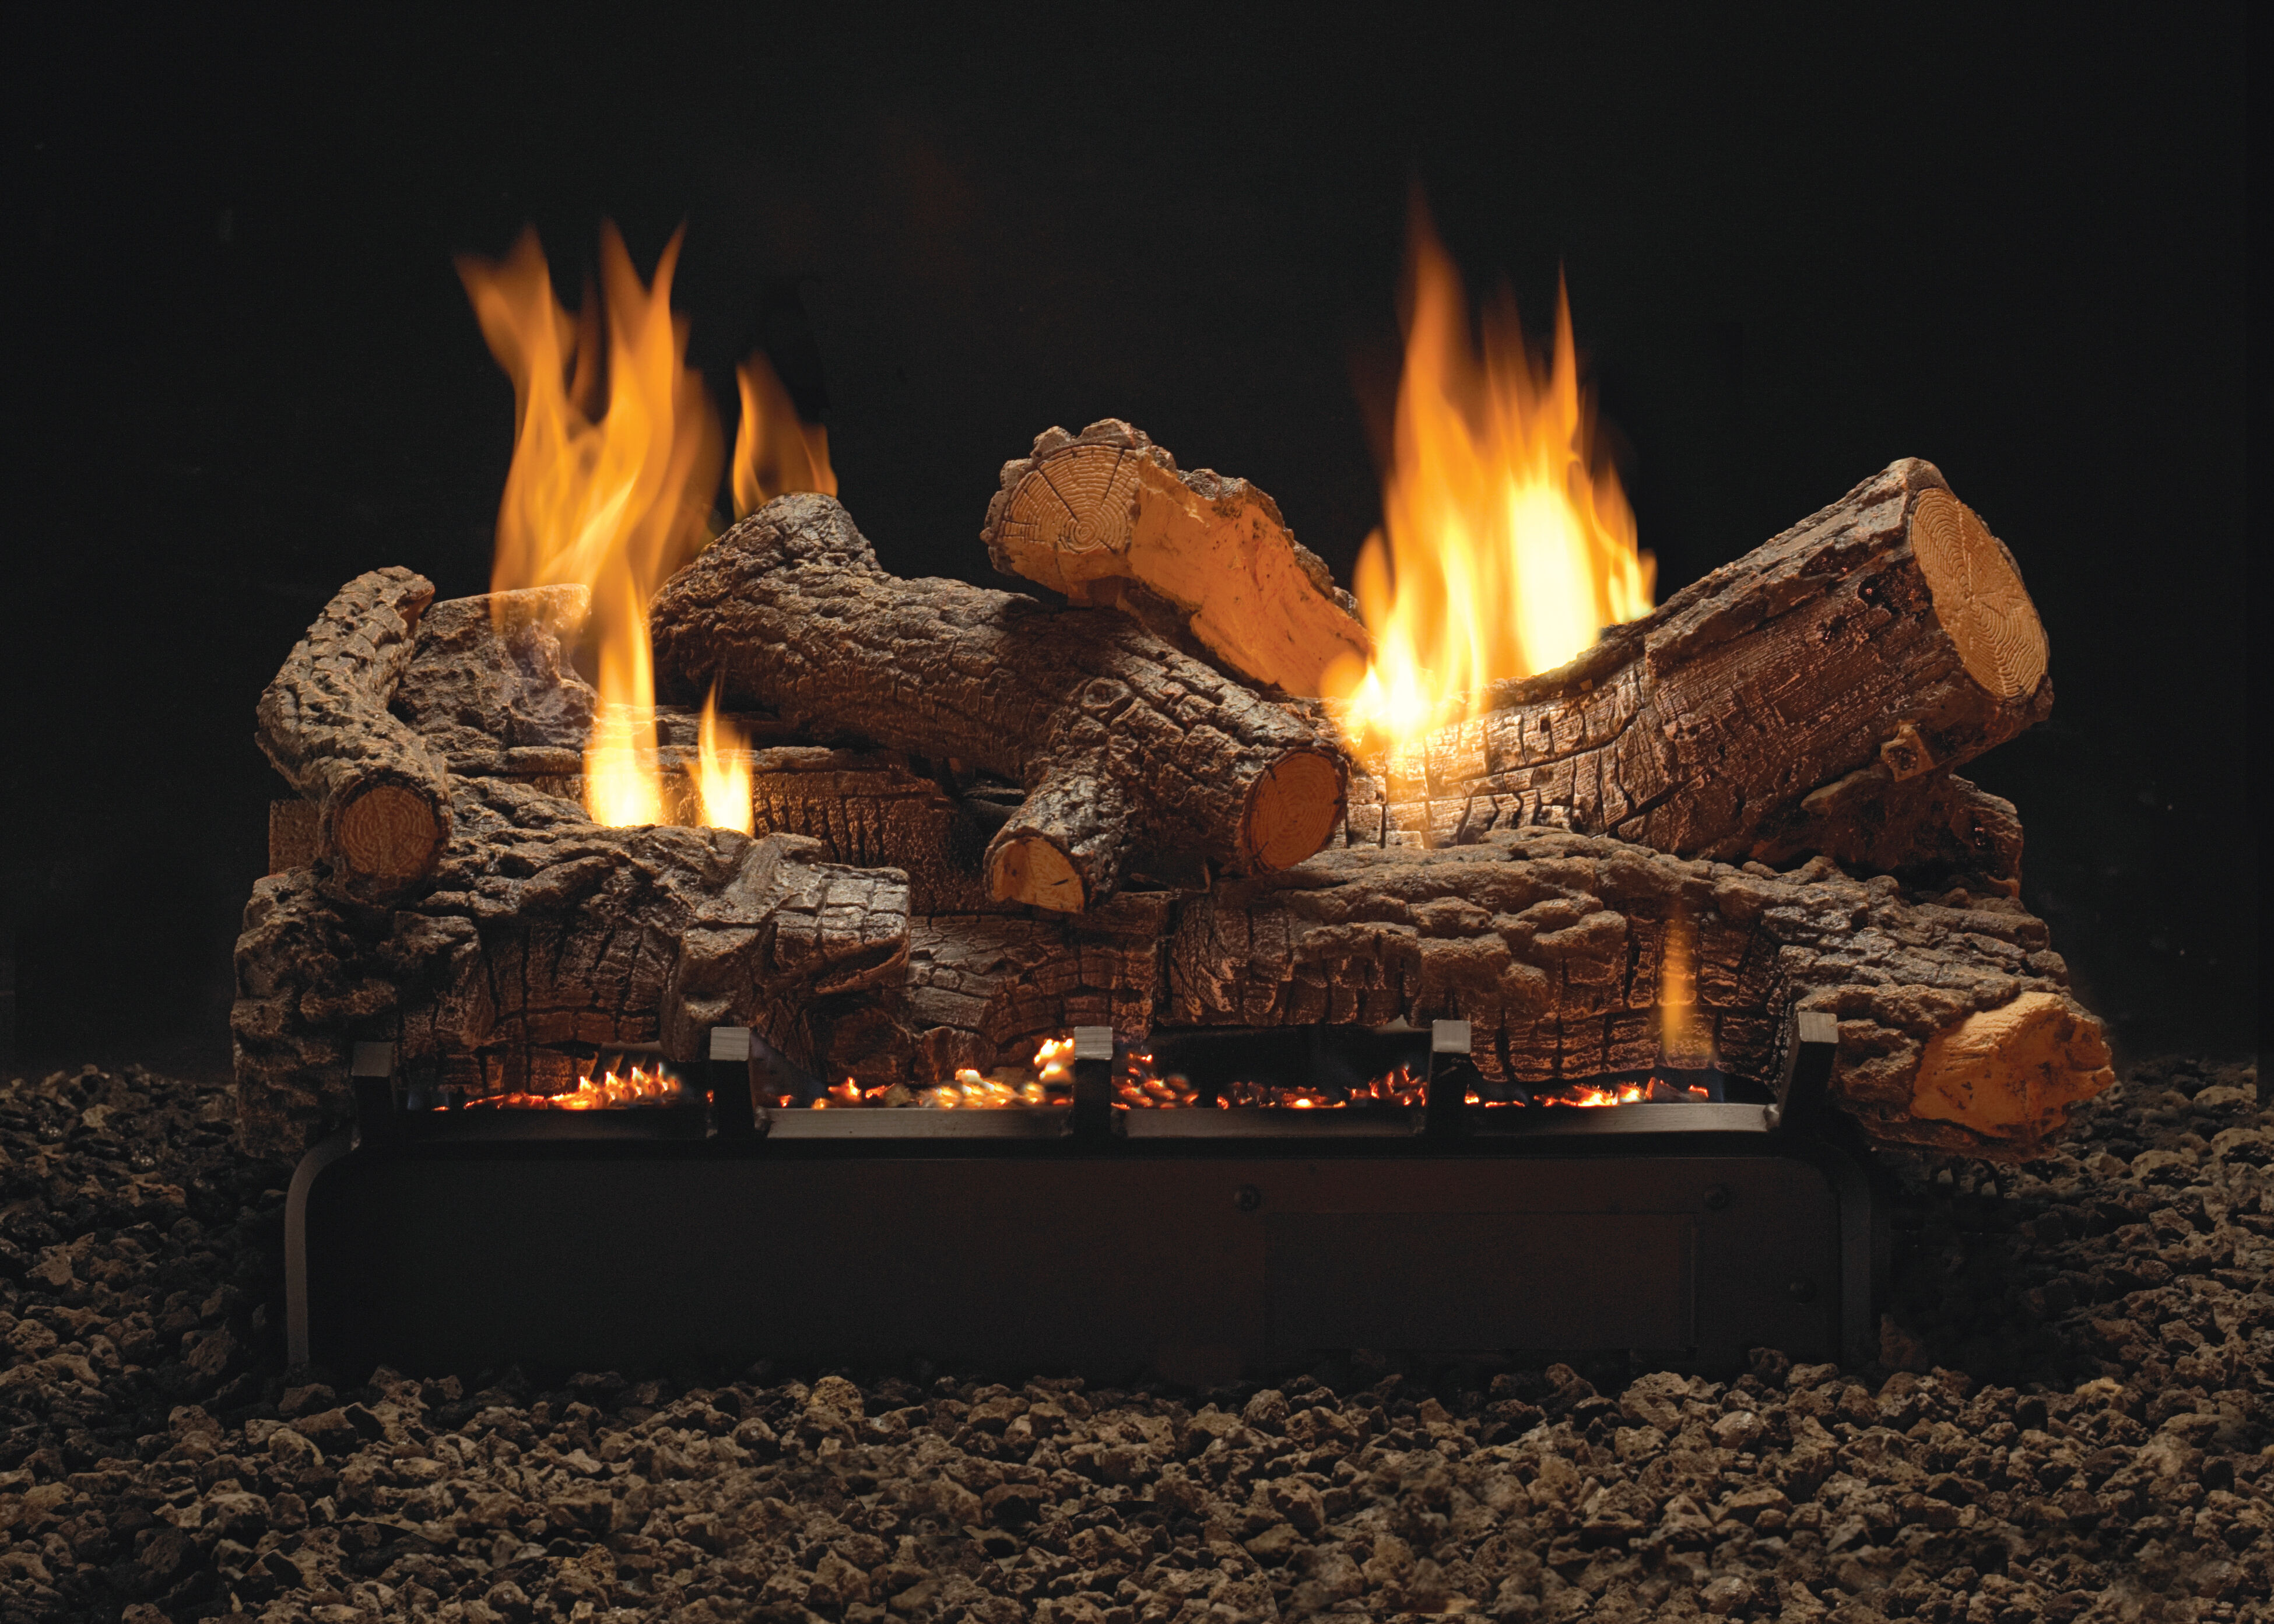 A Ventless gas log set burning on top of a modern black fireplace grate.